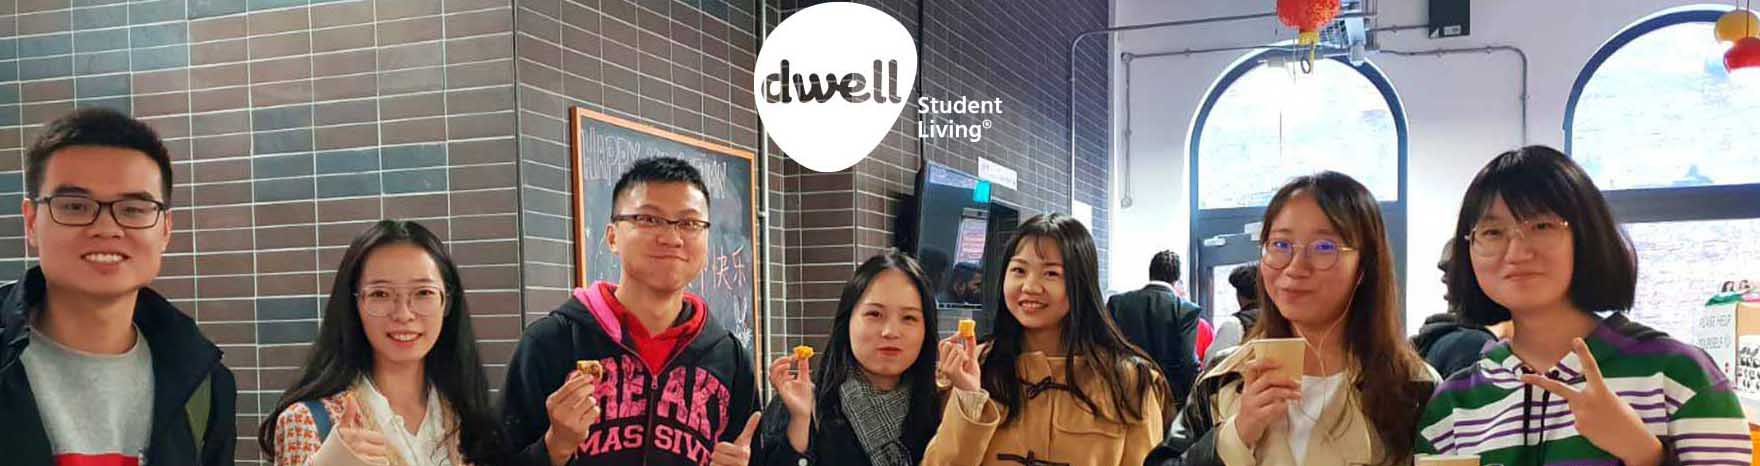 dwell Student Living banner